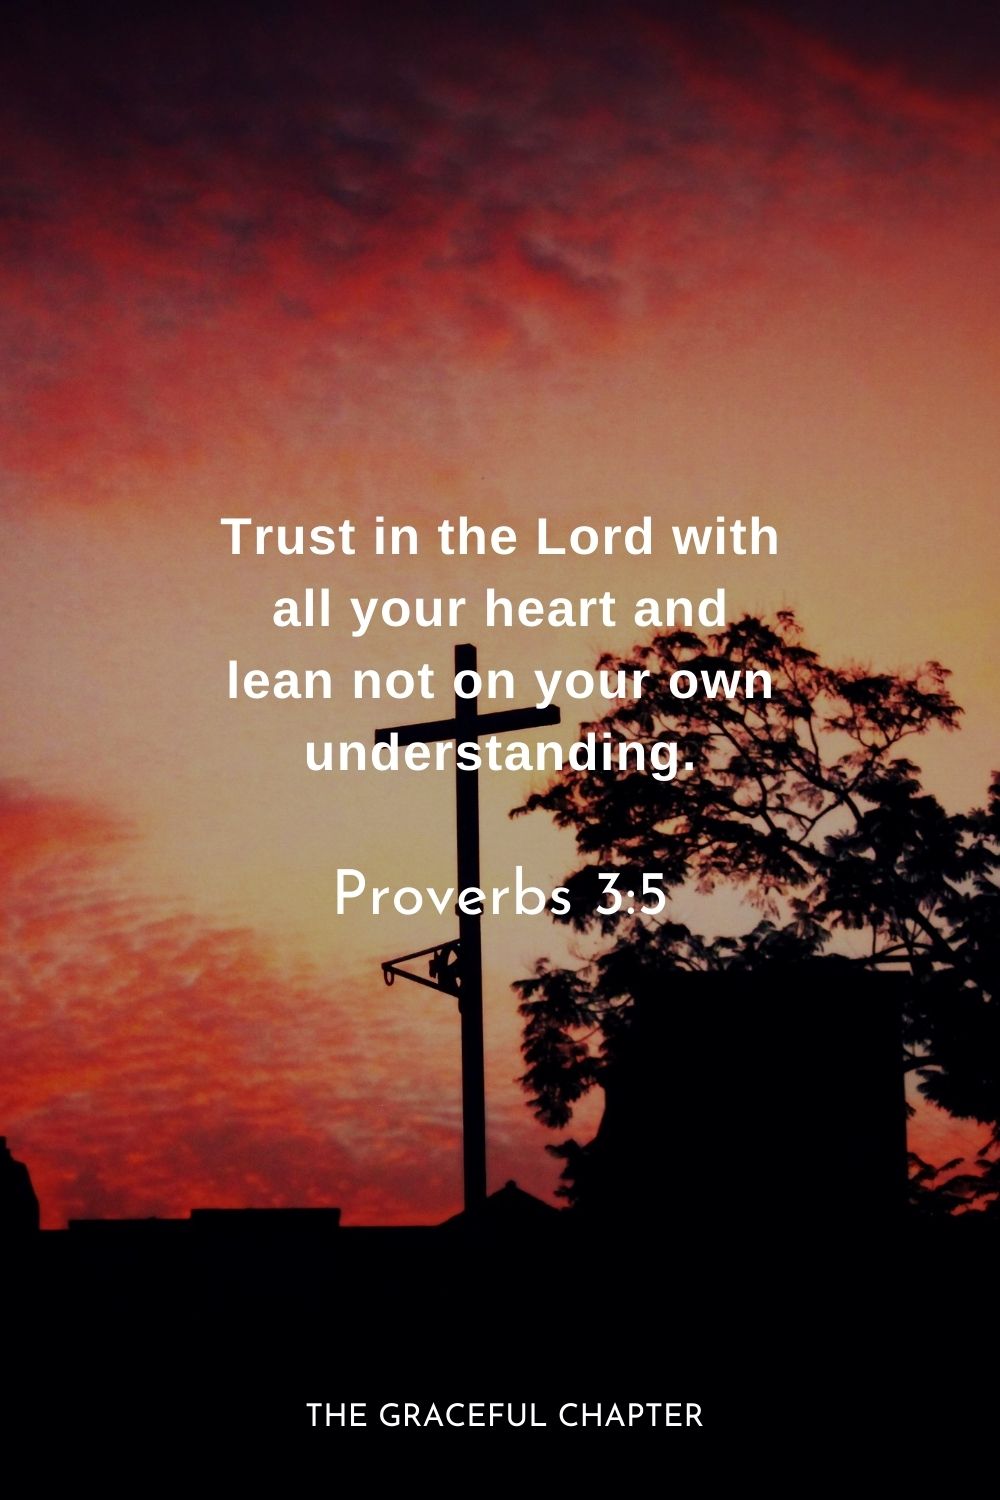 Trust in the Lord with all your heart and lean not on your own understanding.